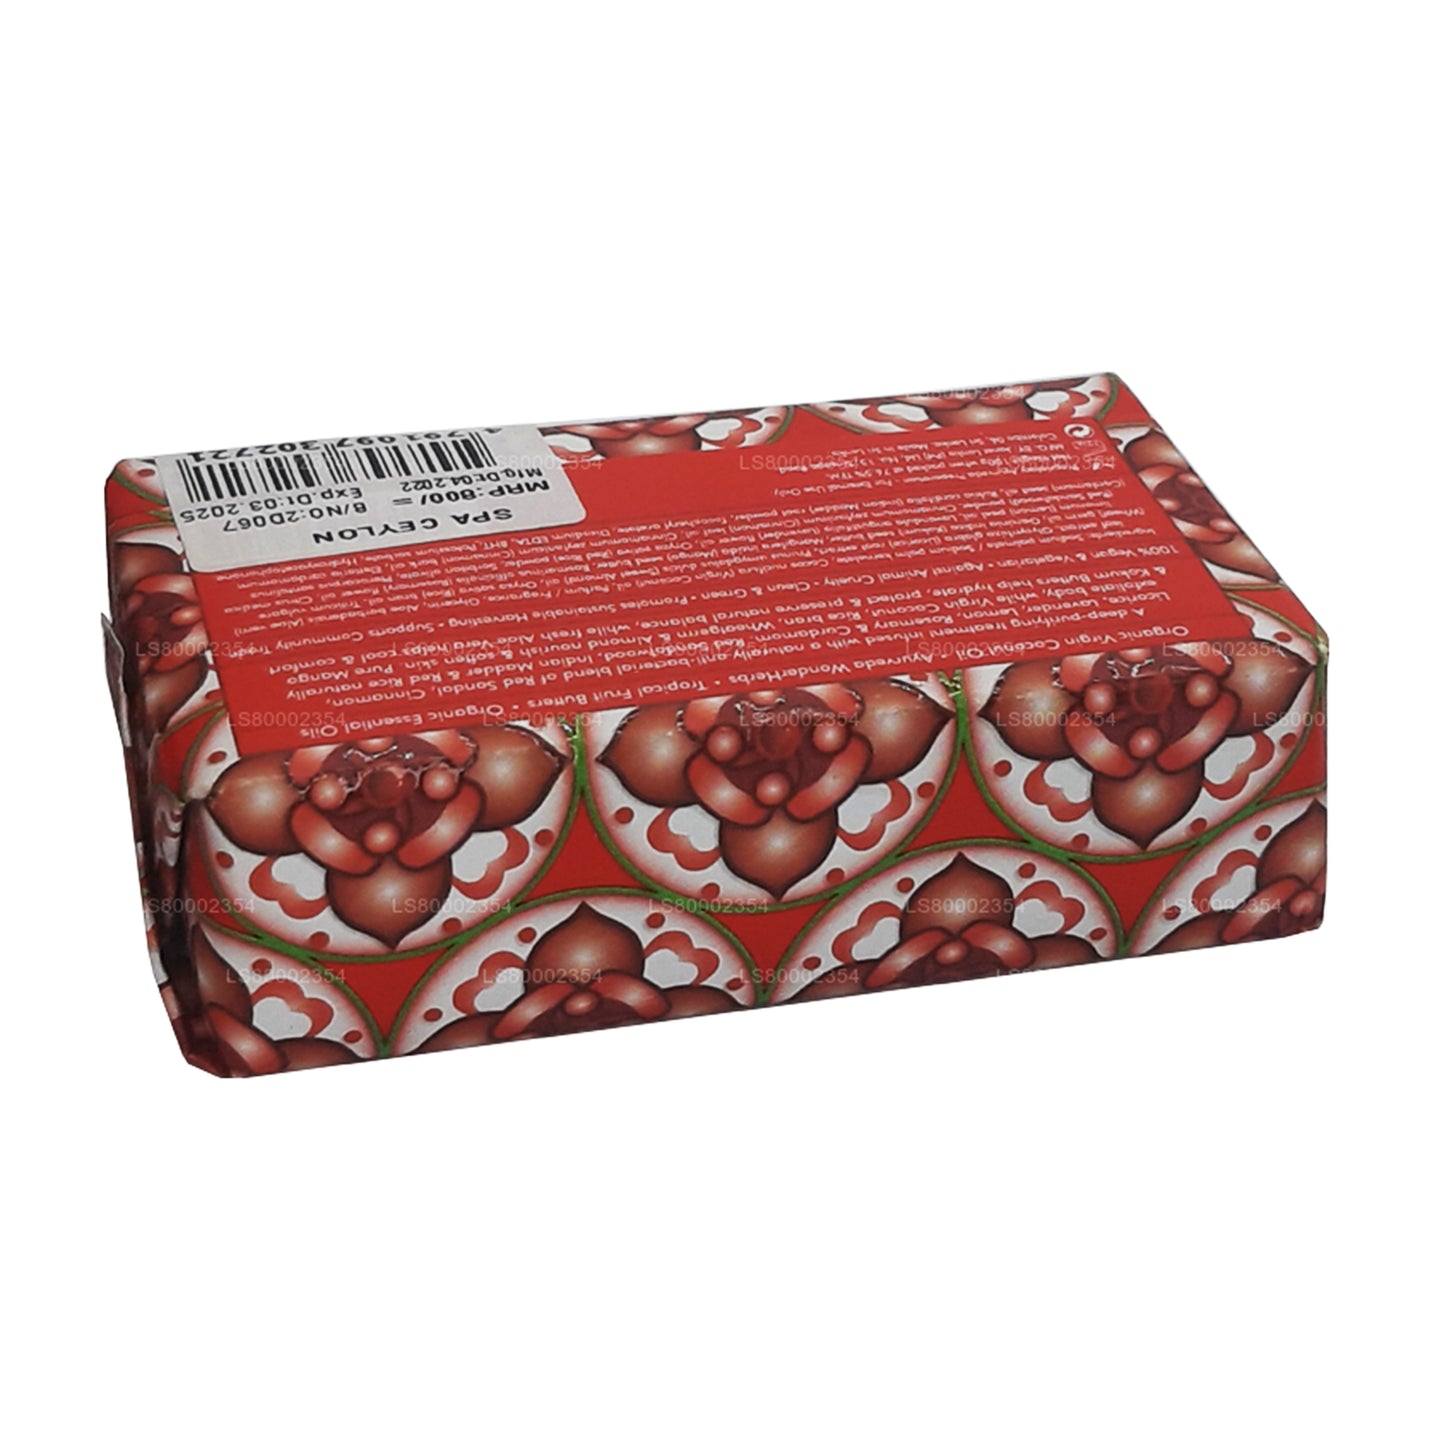 Spa Ceylon Red Sandal and Cinnamon Anti-bacterial Exfoliating Wellness Soap (100g)